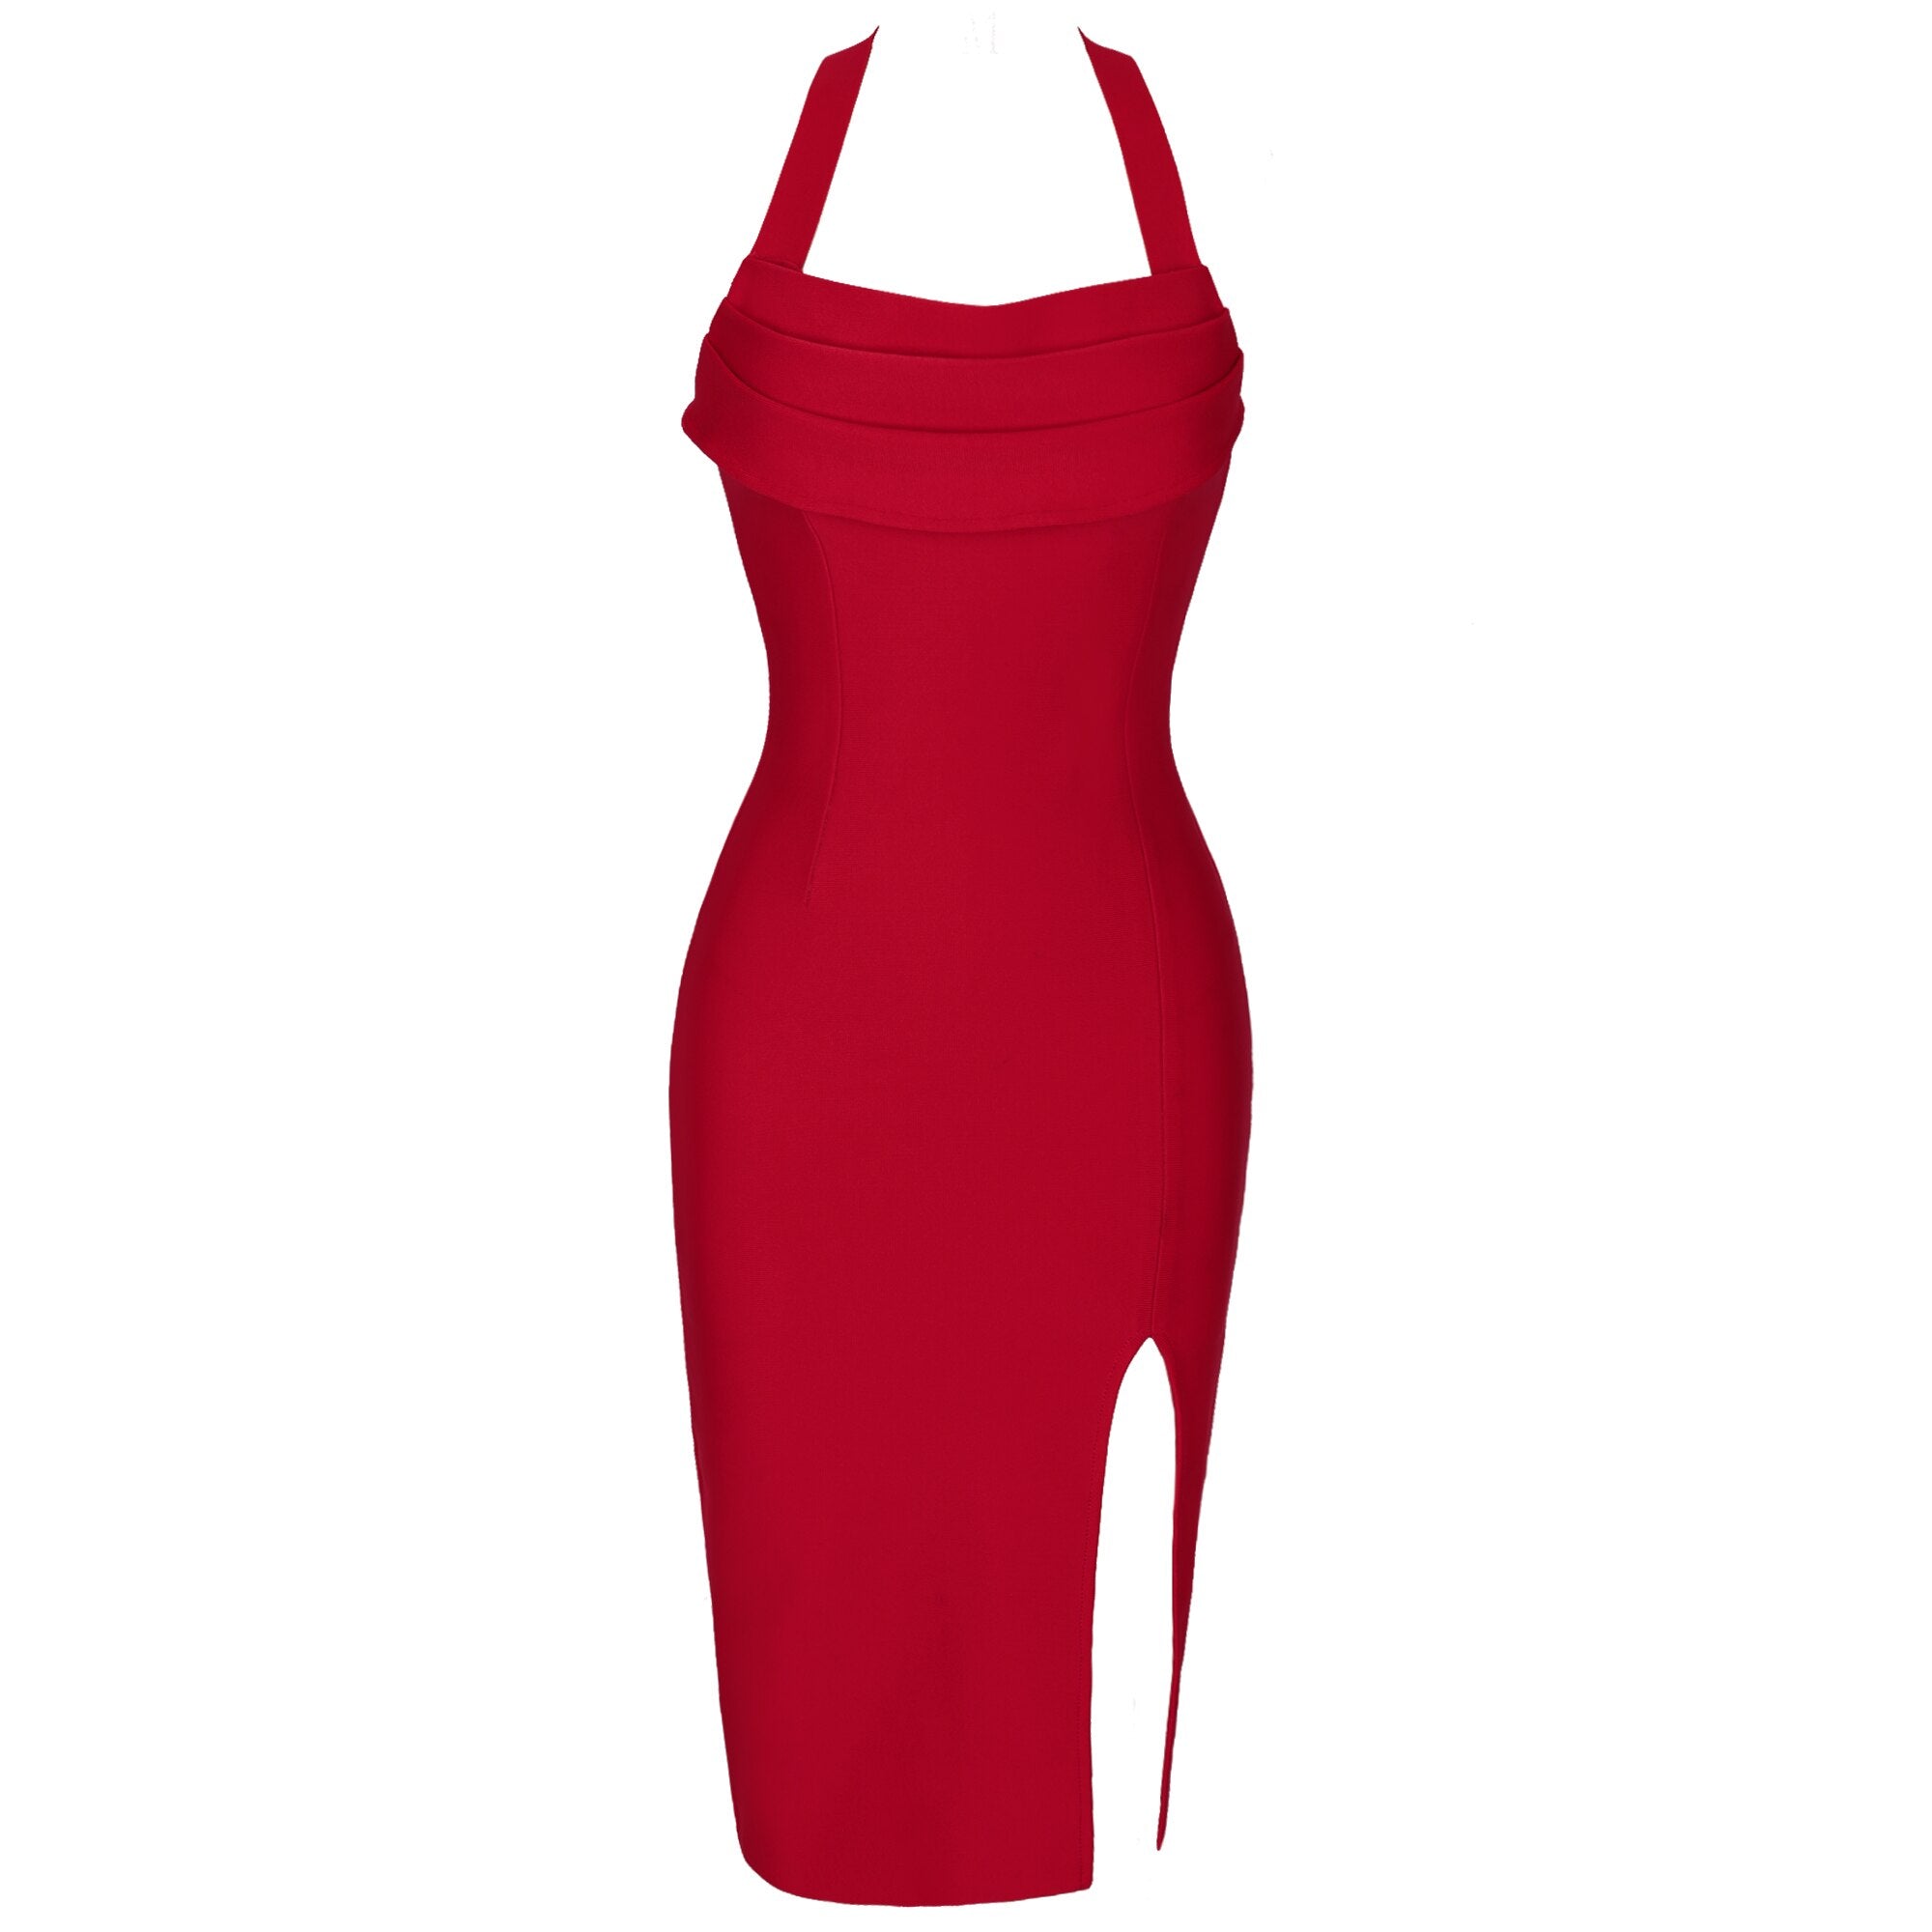 Bandage Dress 2021 New Arrival Summer Red Bandage Dress Bodycon Women Draped Halter Sexy Party Dress Evening Club Outfits